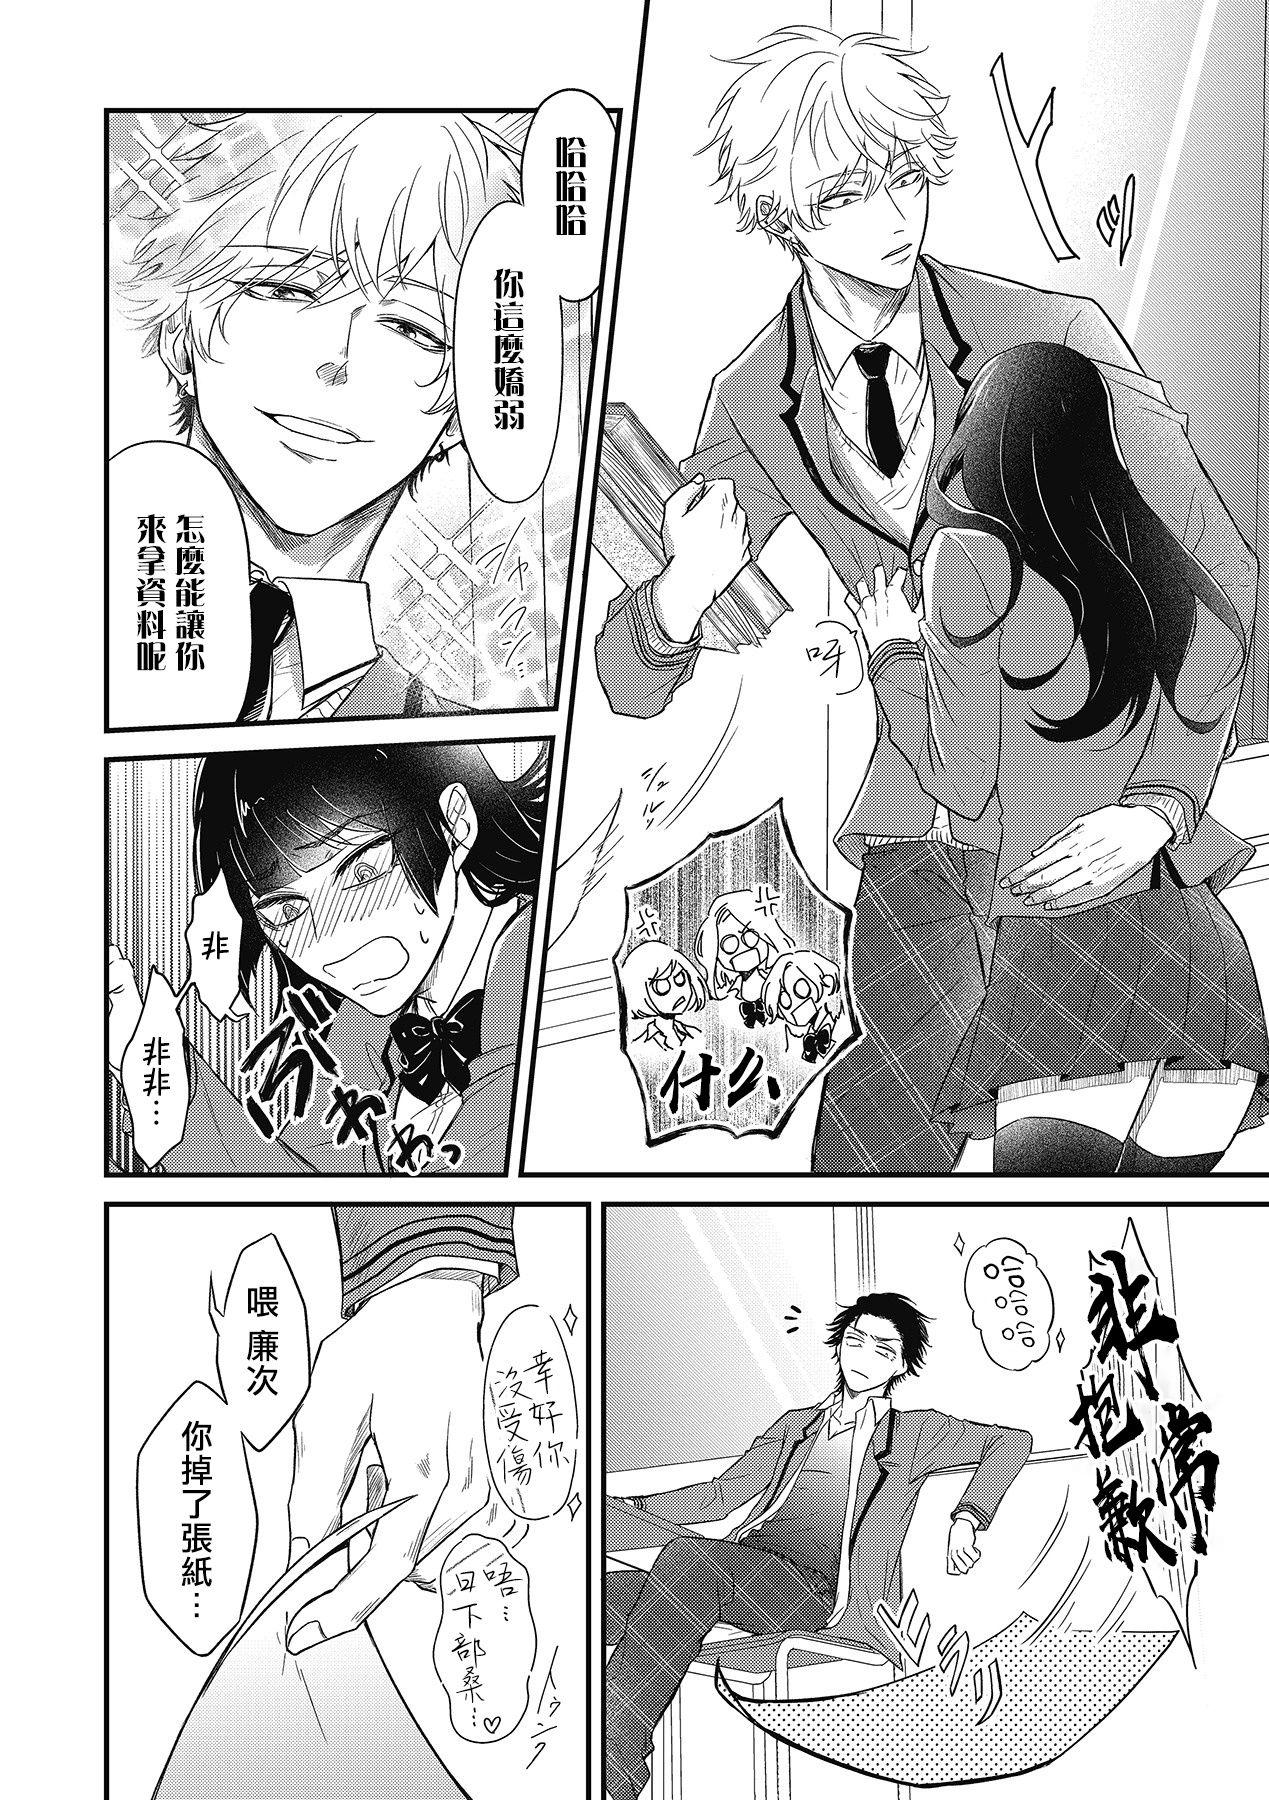 Ano pop one's cherry Vol. 1-3 Striptease - Page 12